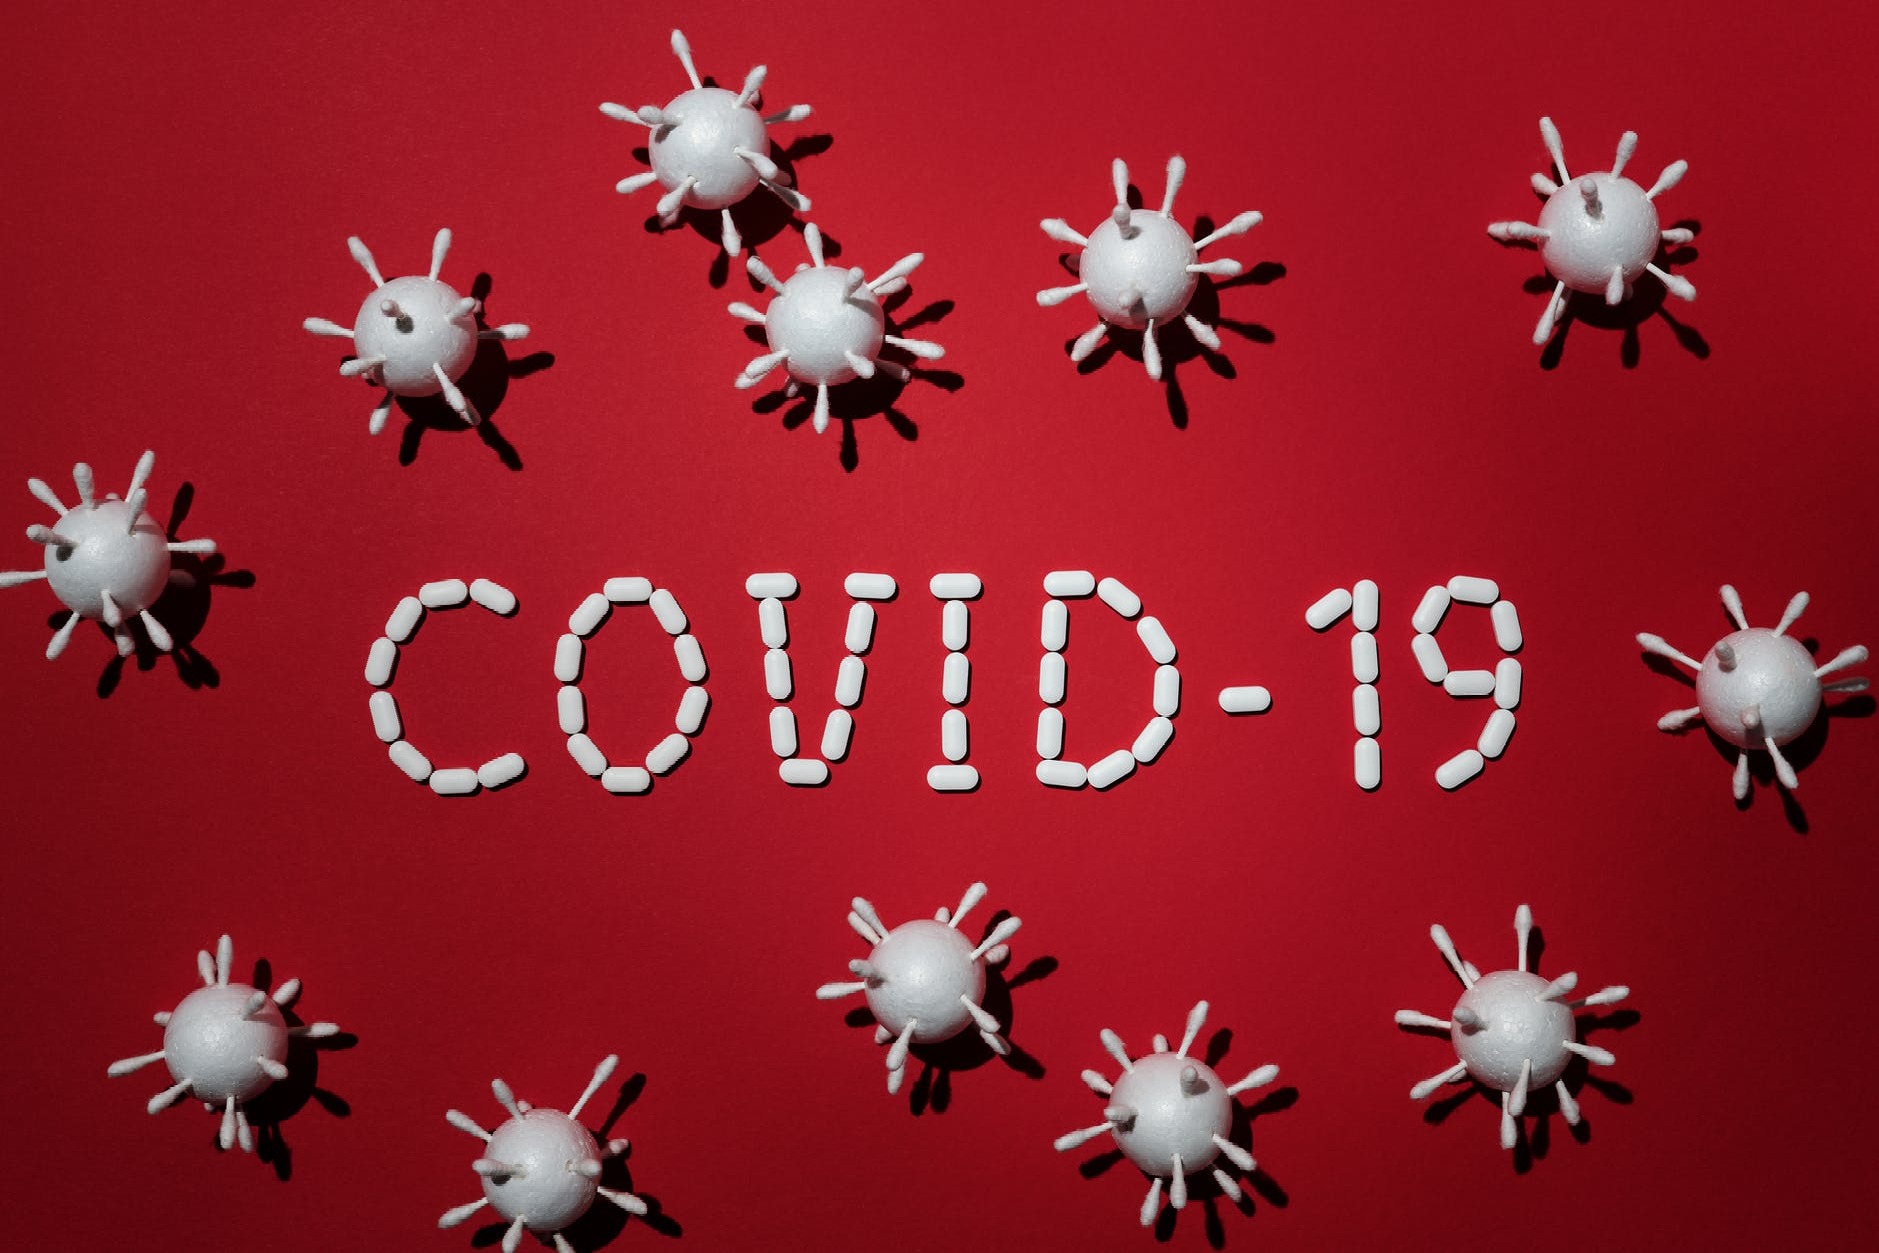  434 deaths and 19148 new COVID19 cases in the last 24 hours